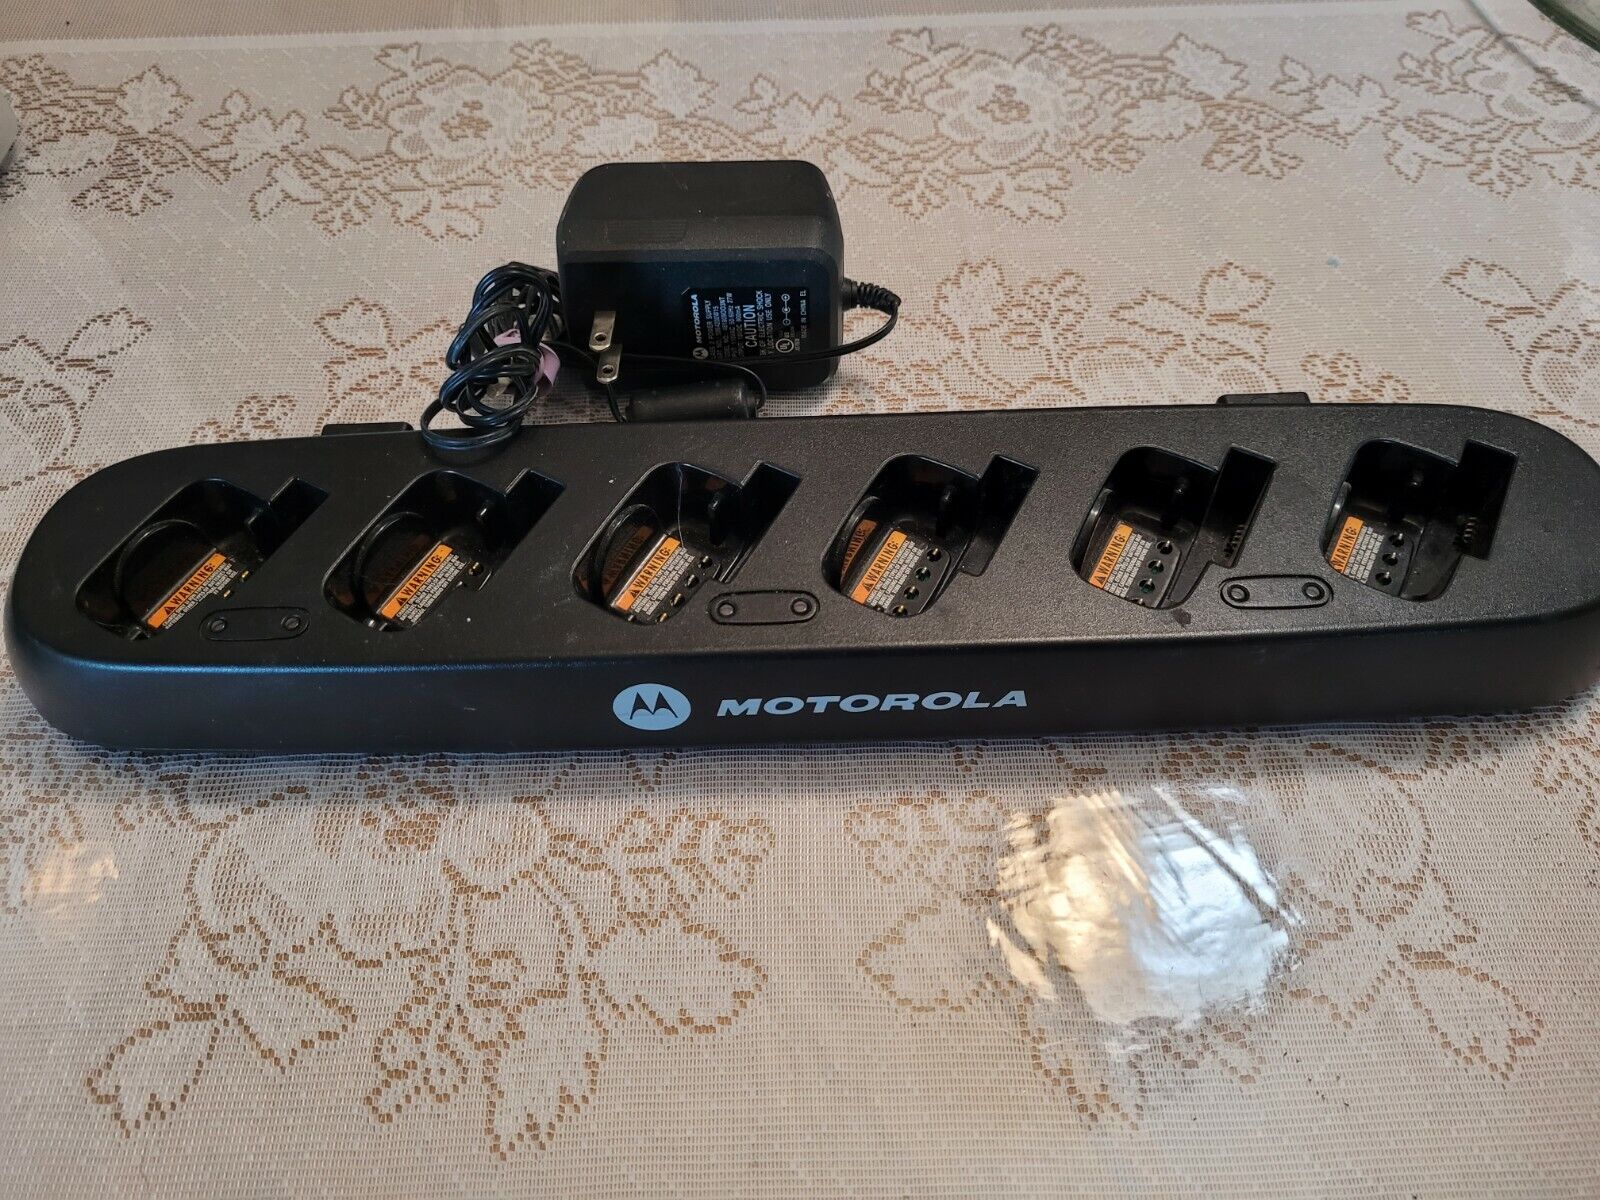 Motorola Indefinitely HCTN40020 5 popular 6 Bay And Wall Wart Charger